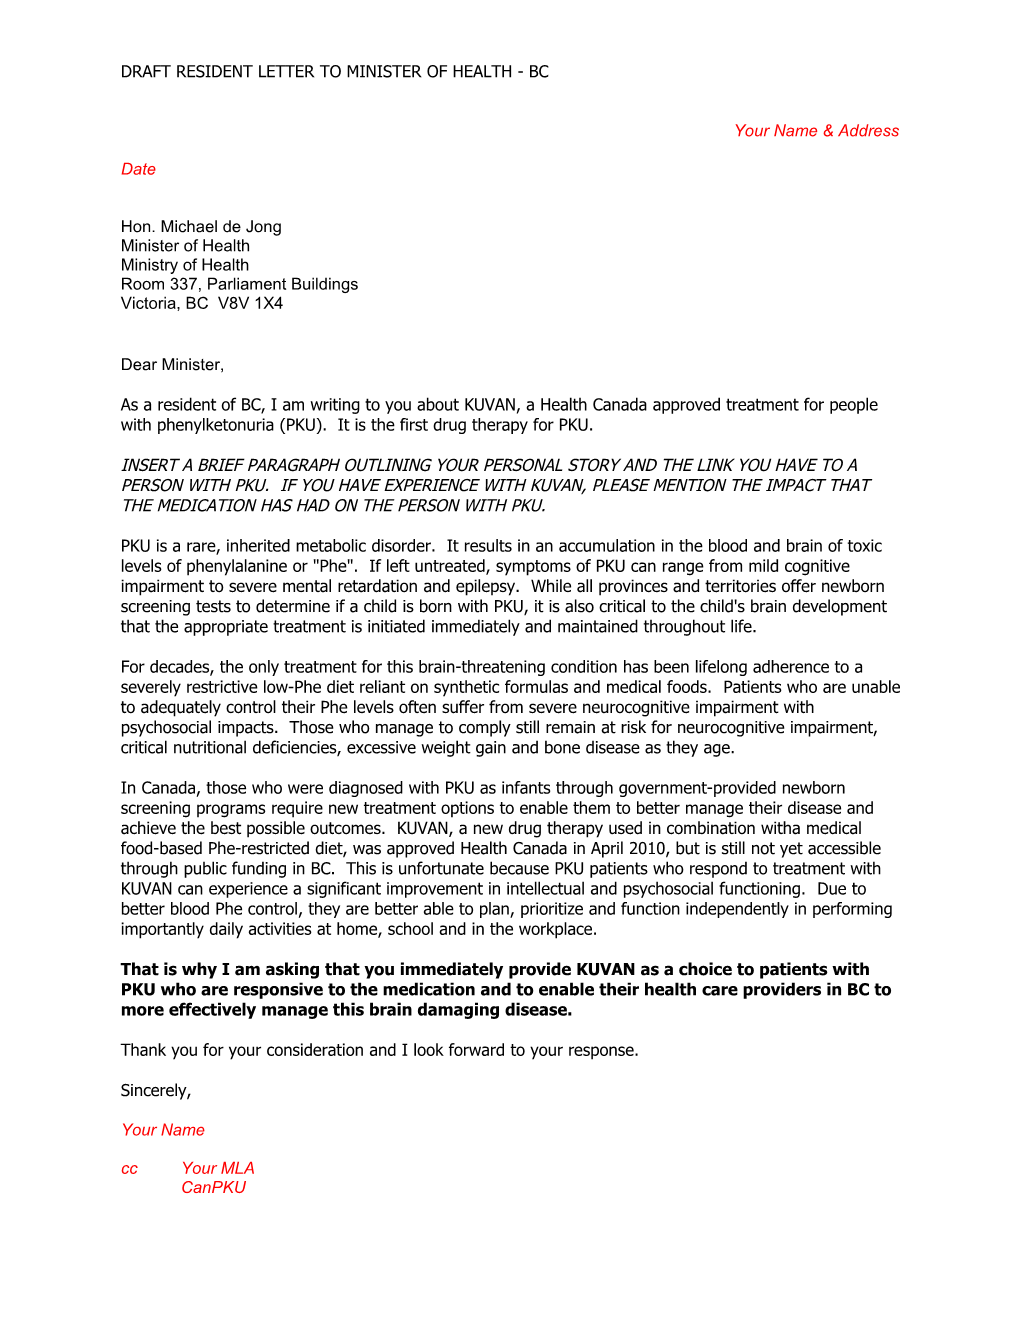 Draft Resident Letter to Minister of Health - Bc